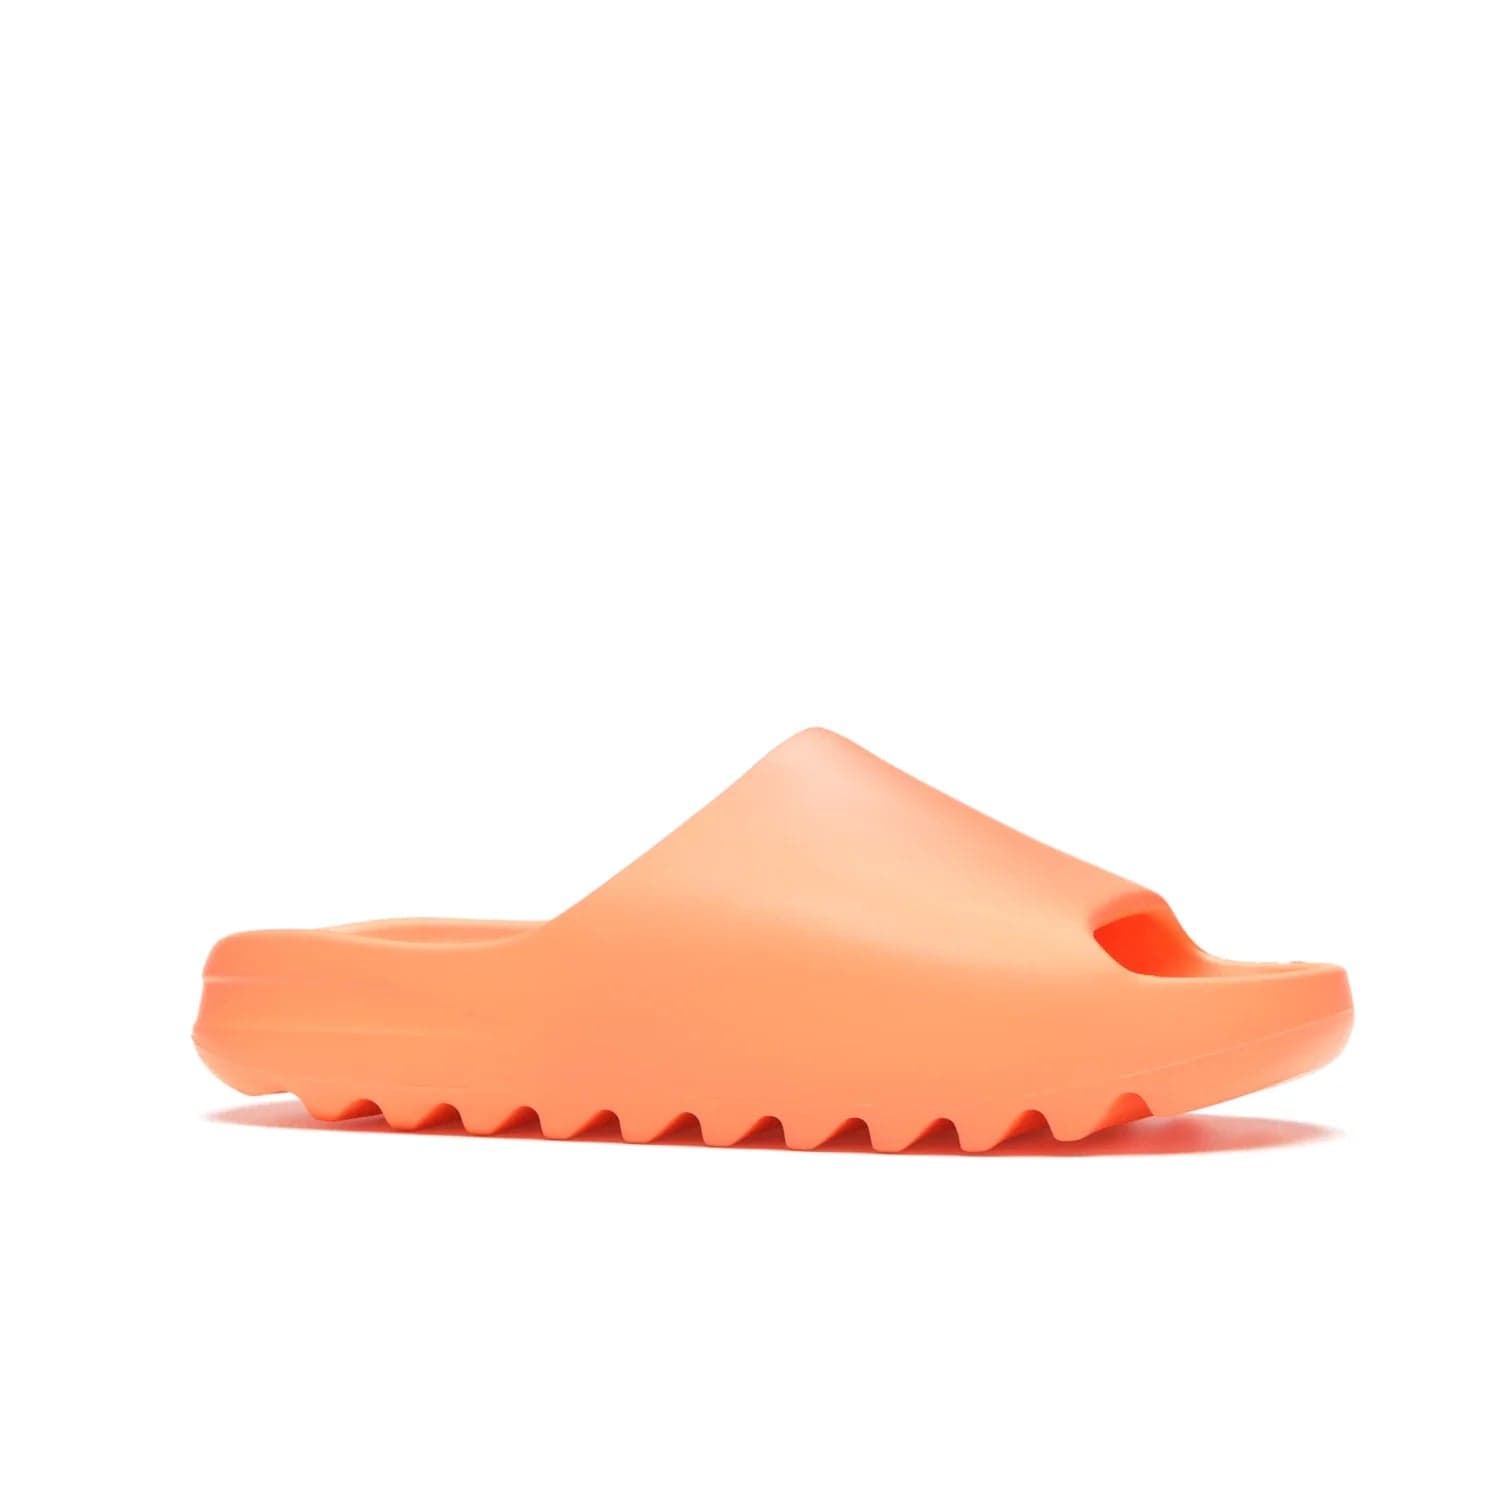 adidas Yeezy Slide Enflame Orange - Image 3 - Only at www.BallersClubKickz.com - Limited edition adidas Yeezy Slide featuring a bold Enflame Orange upper and EVA foam construction. Grooved outsole for traction and support. Released June 2021. Perfect for summer.